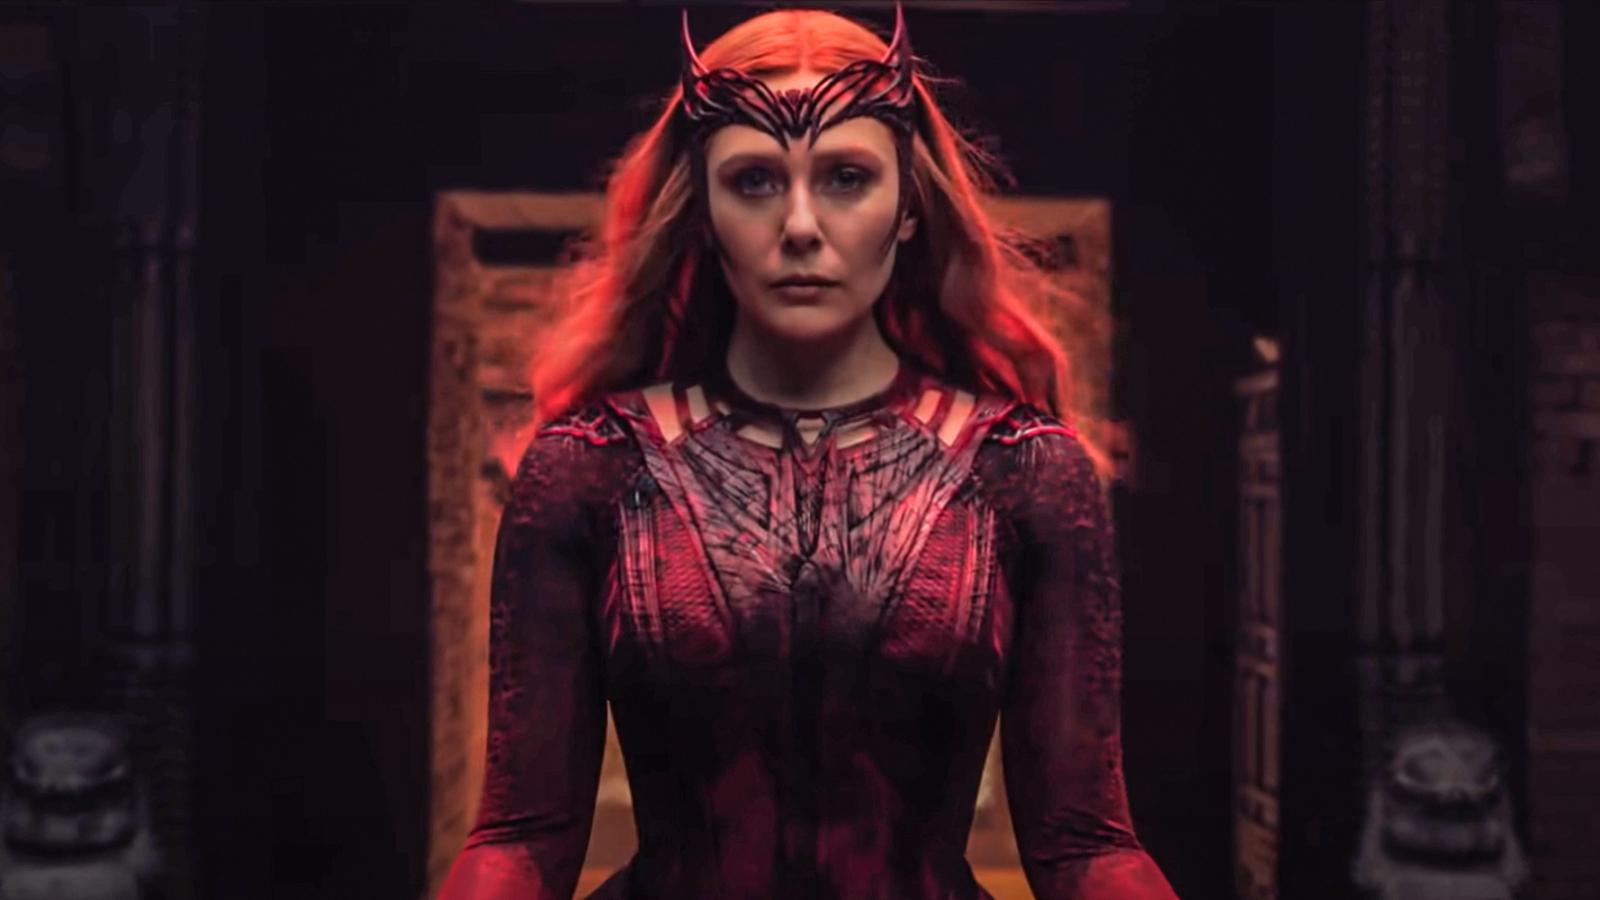 How Powerful is The Scarlet Witch?